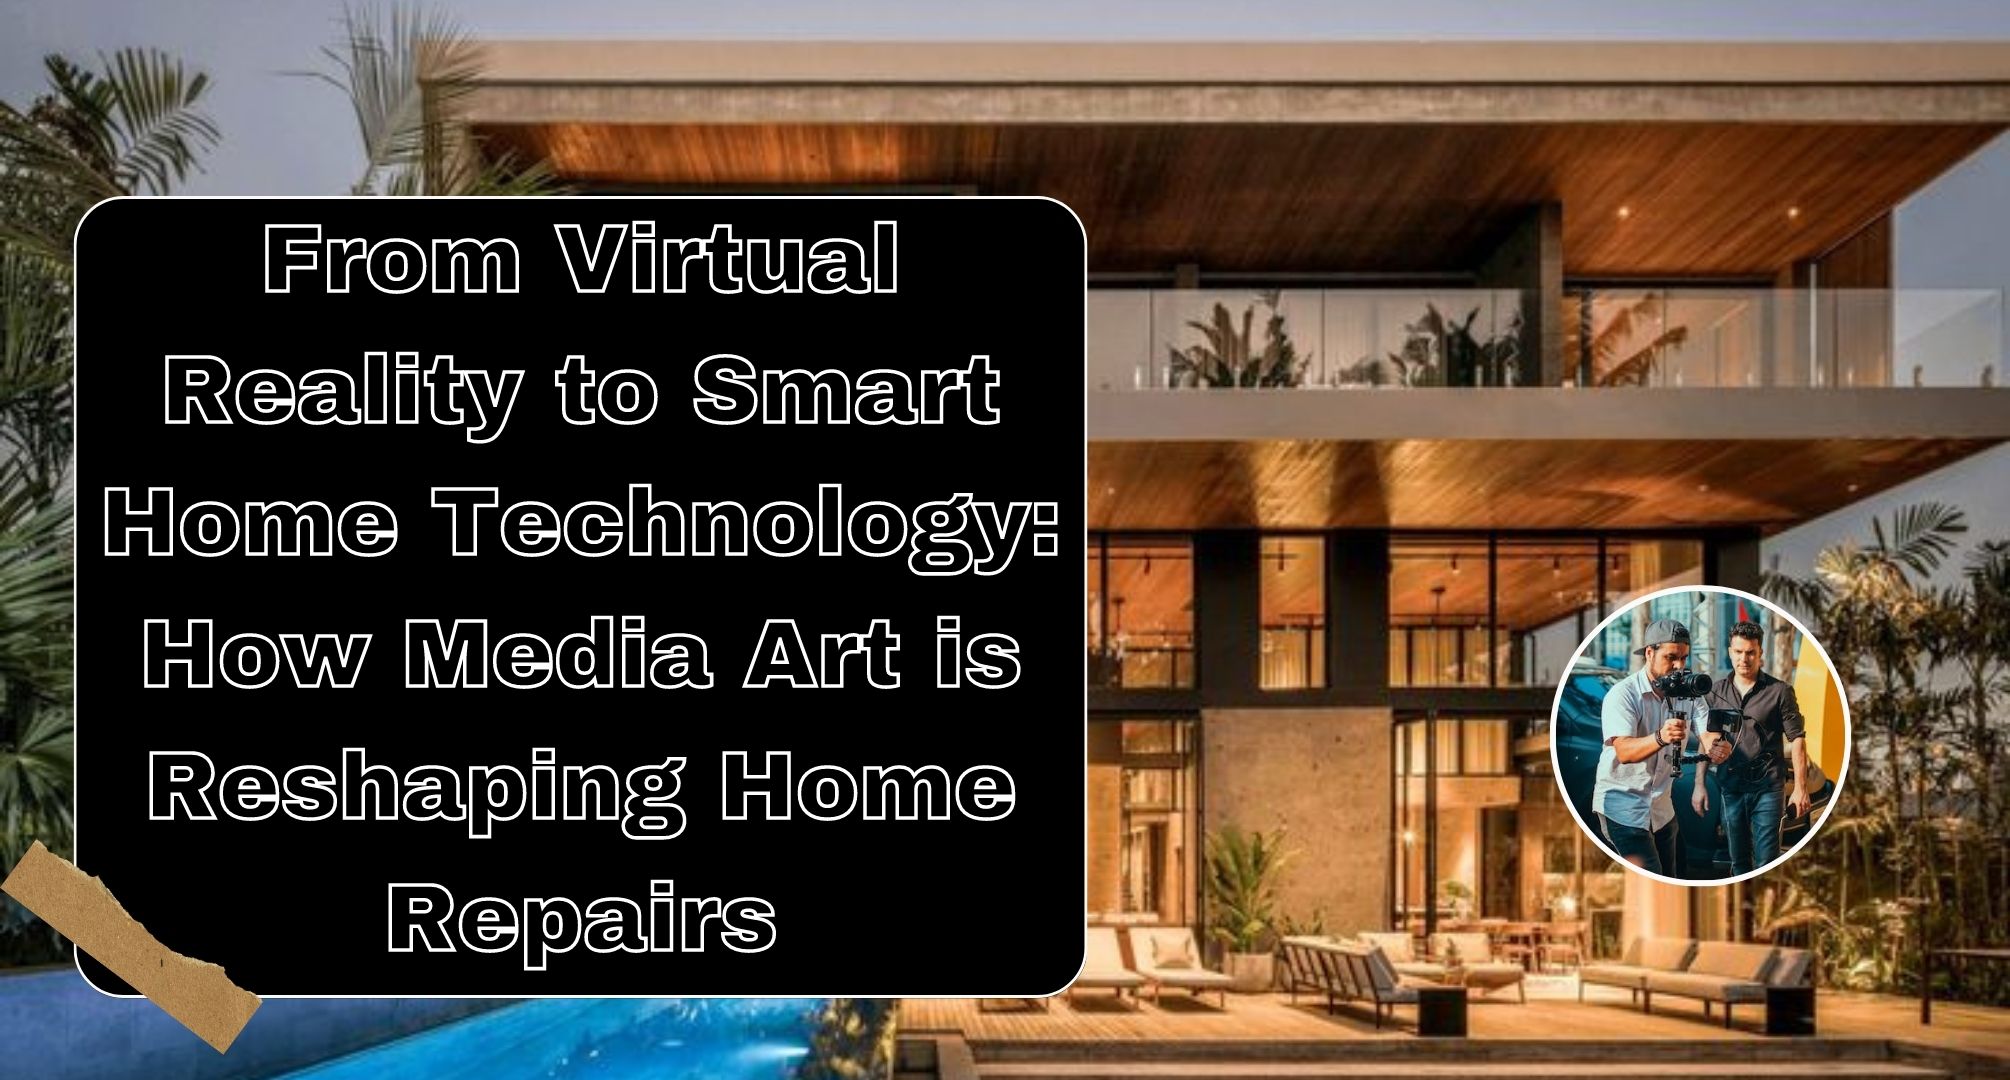 From Virtual Reality to Smart Home Technology How Media Art is Reshaping Home Repairs